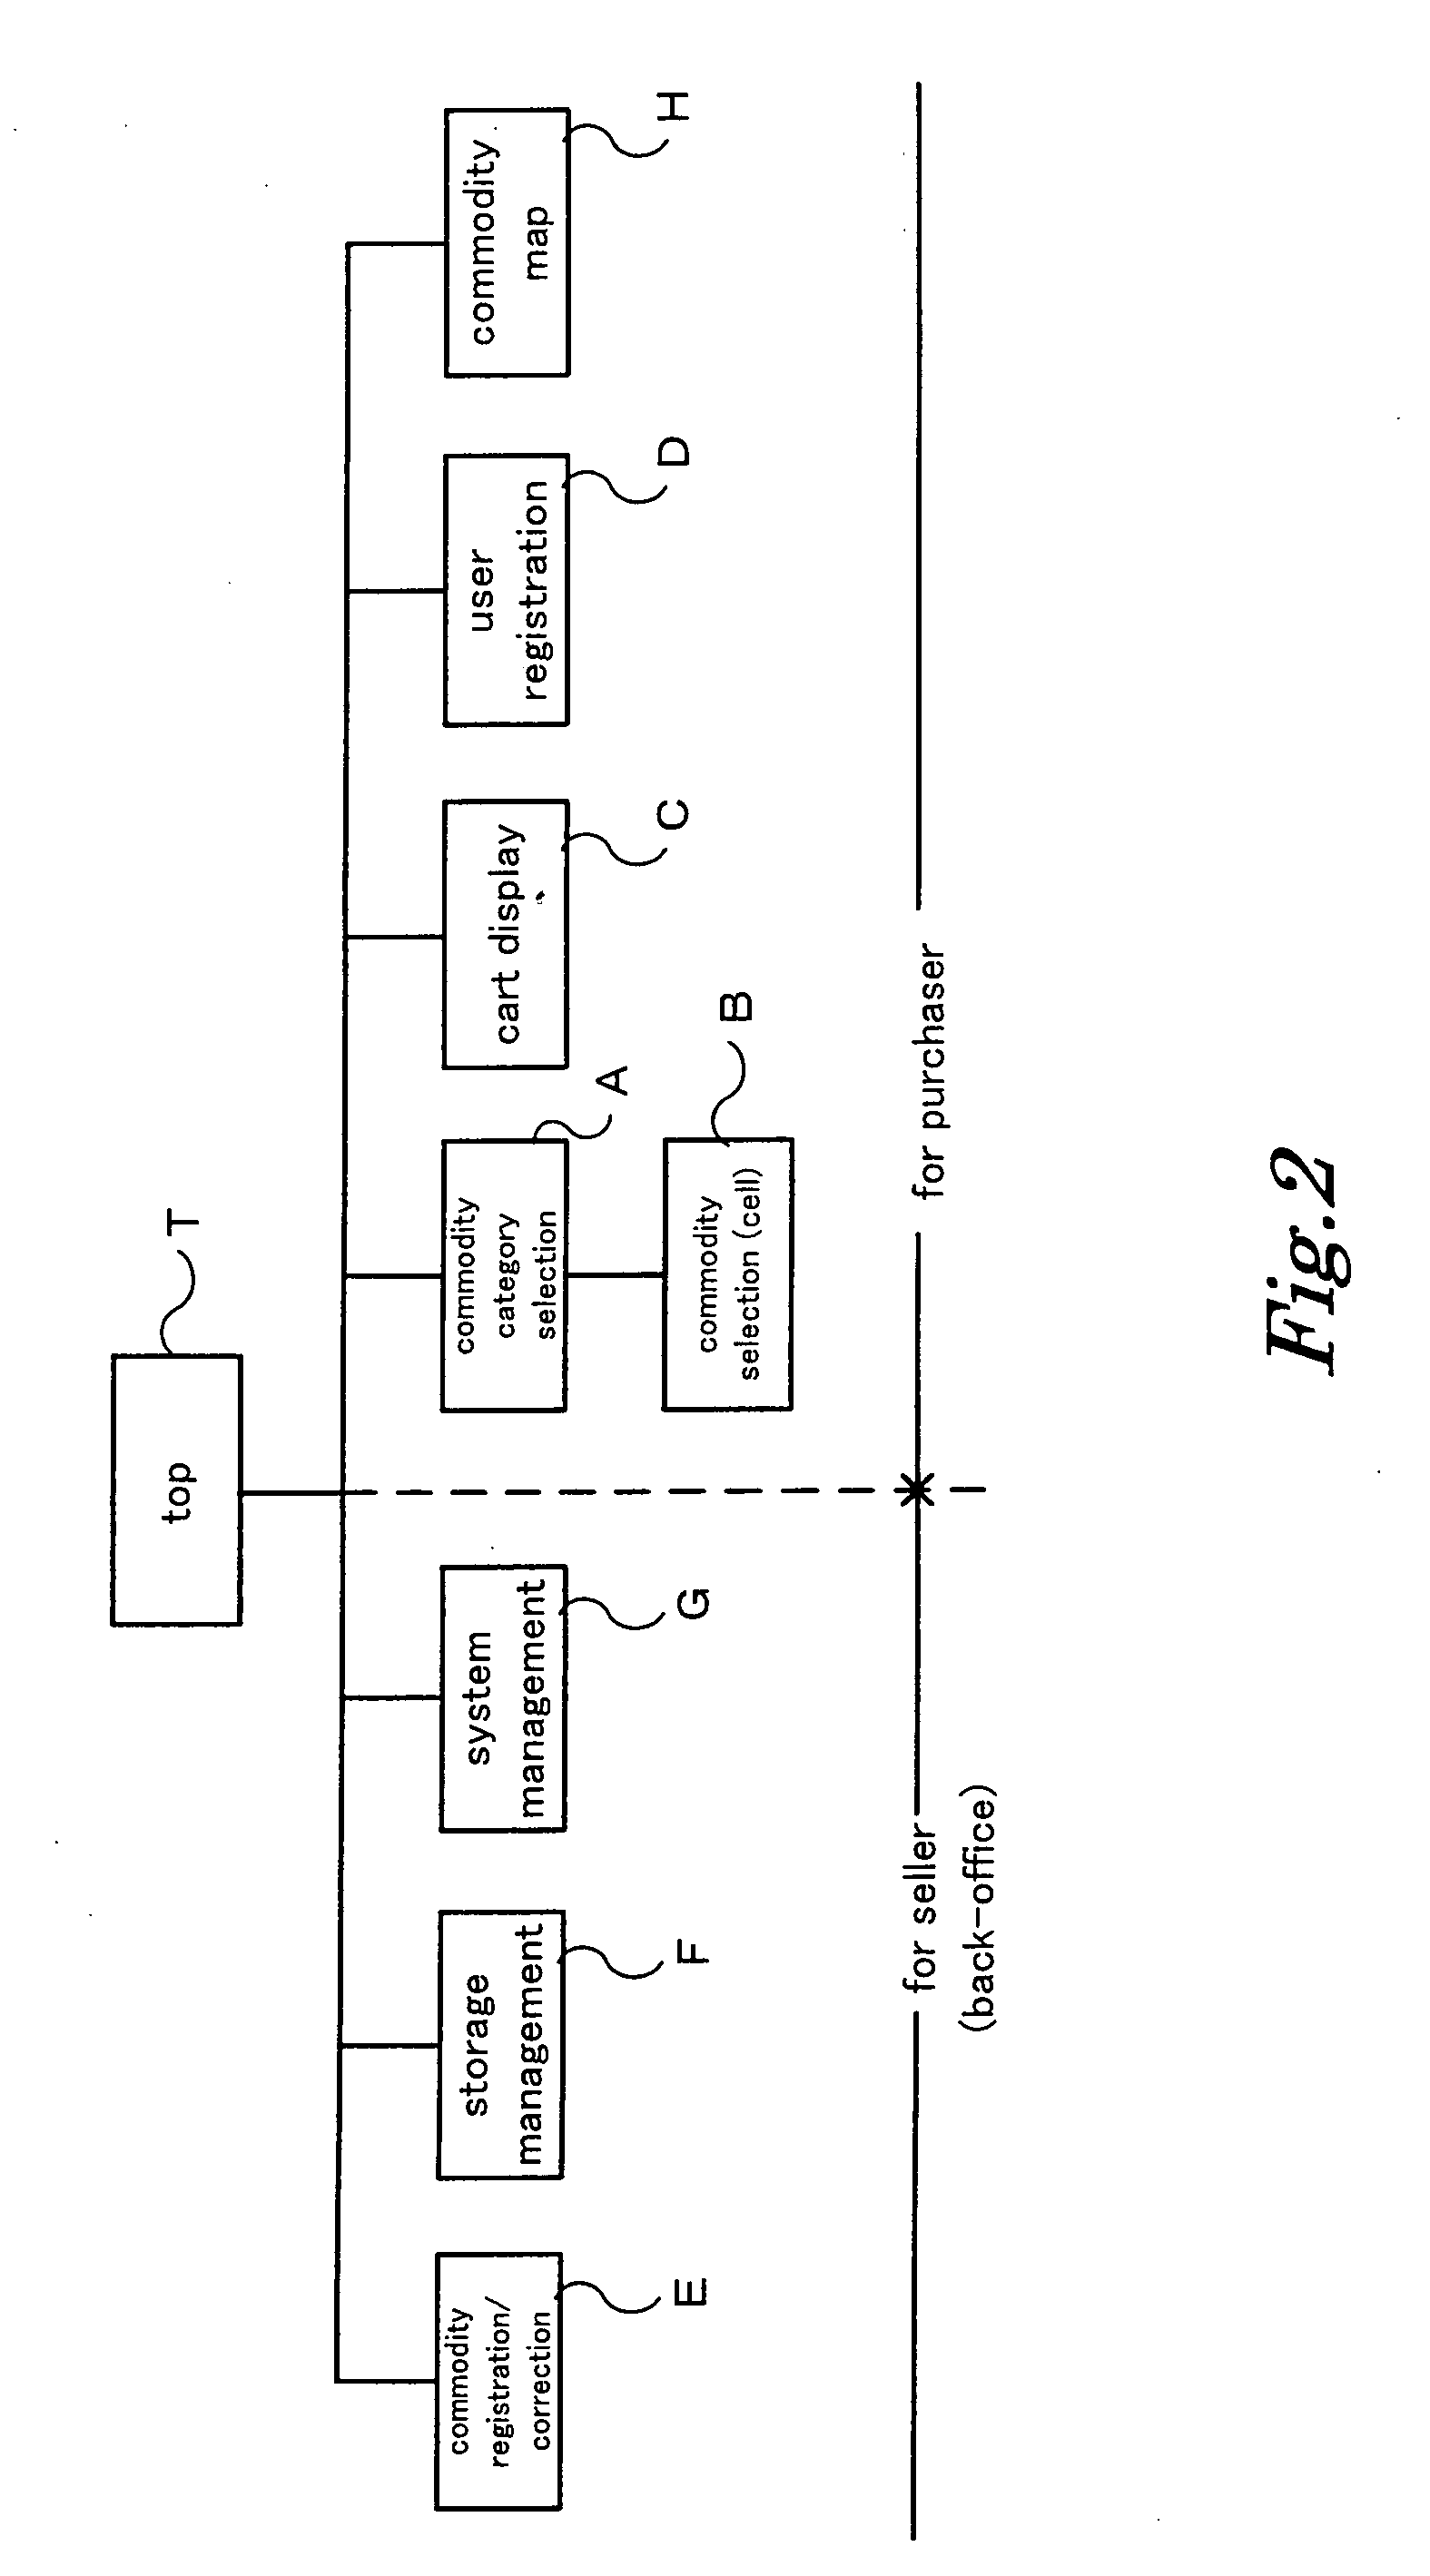 Electronic commerce system